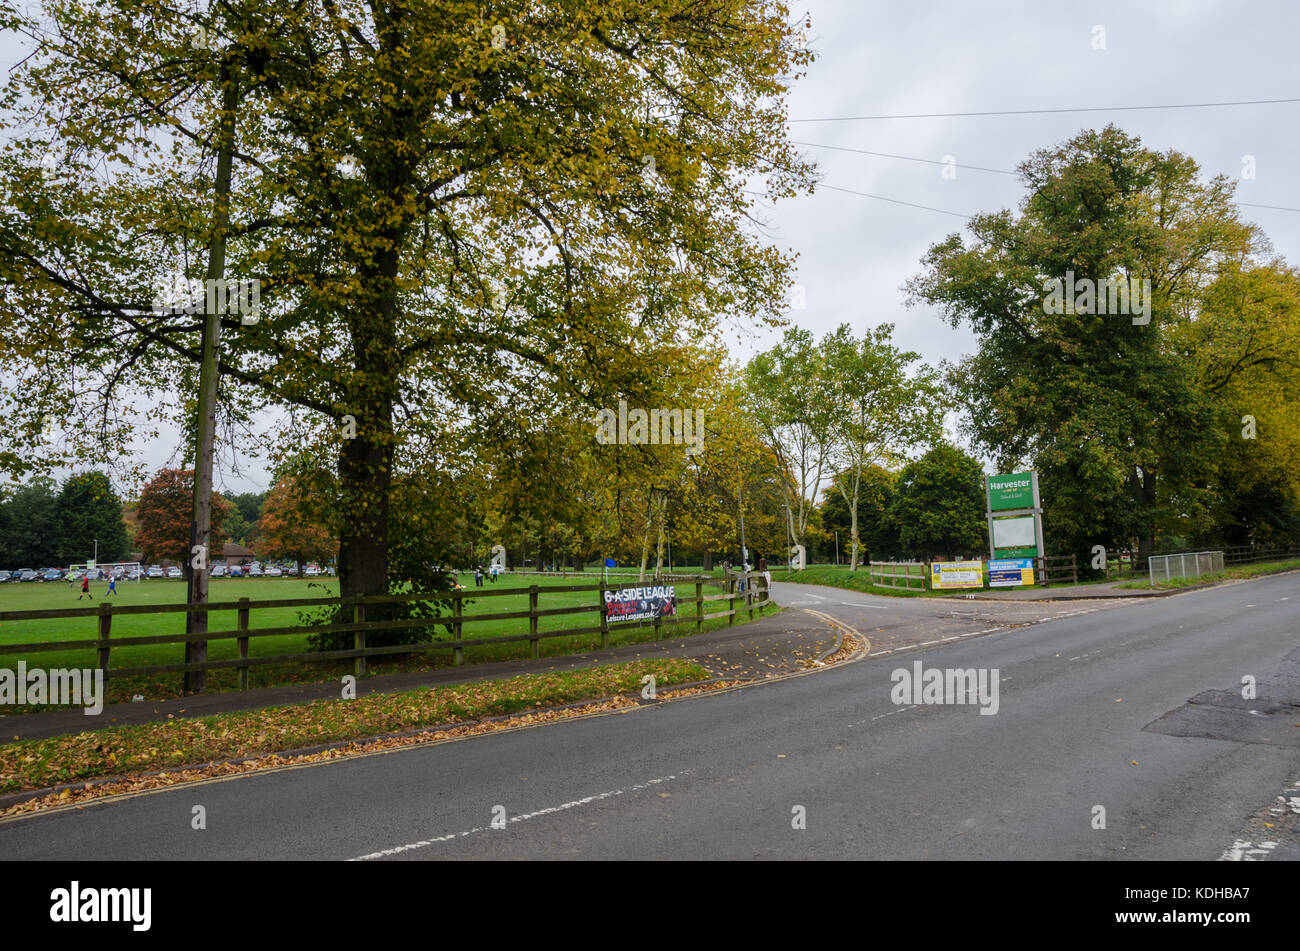 The entrance into Prospect Park off Liebenrood Road in Reading, Berkshire, UK. Stock Photo